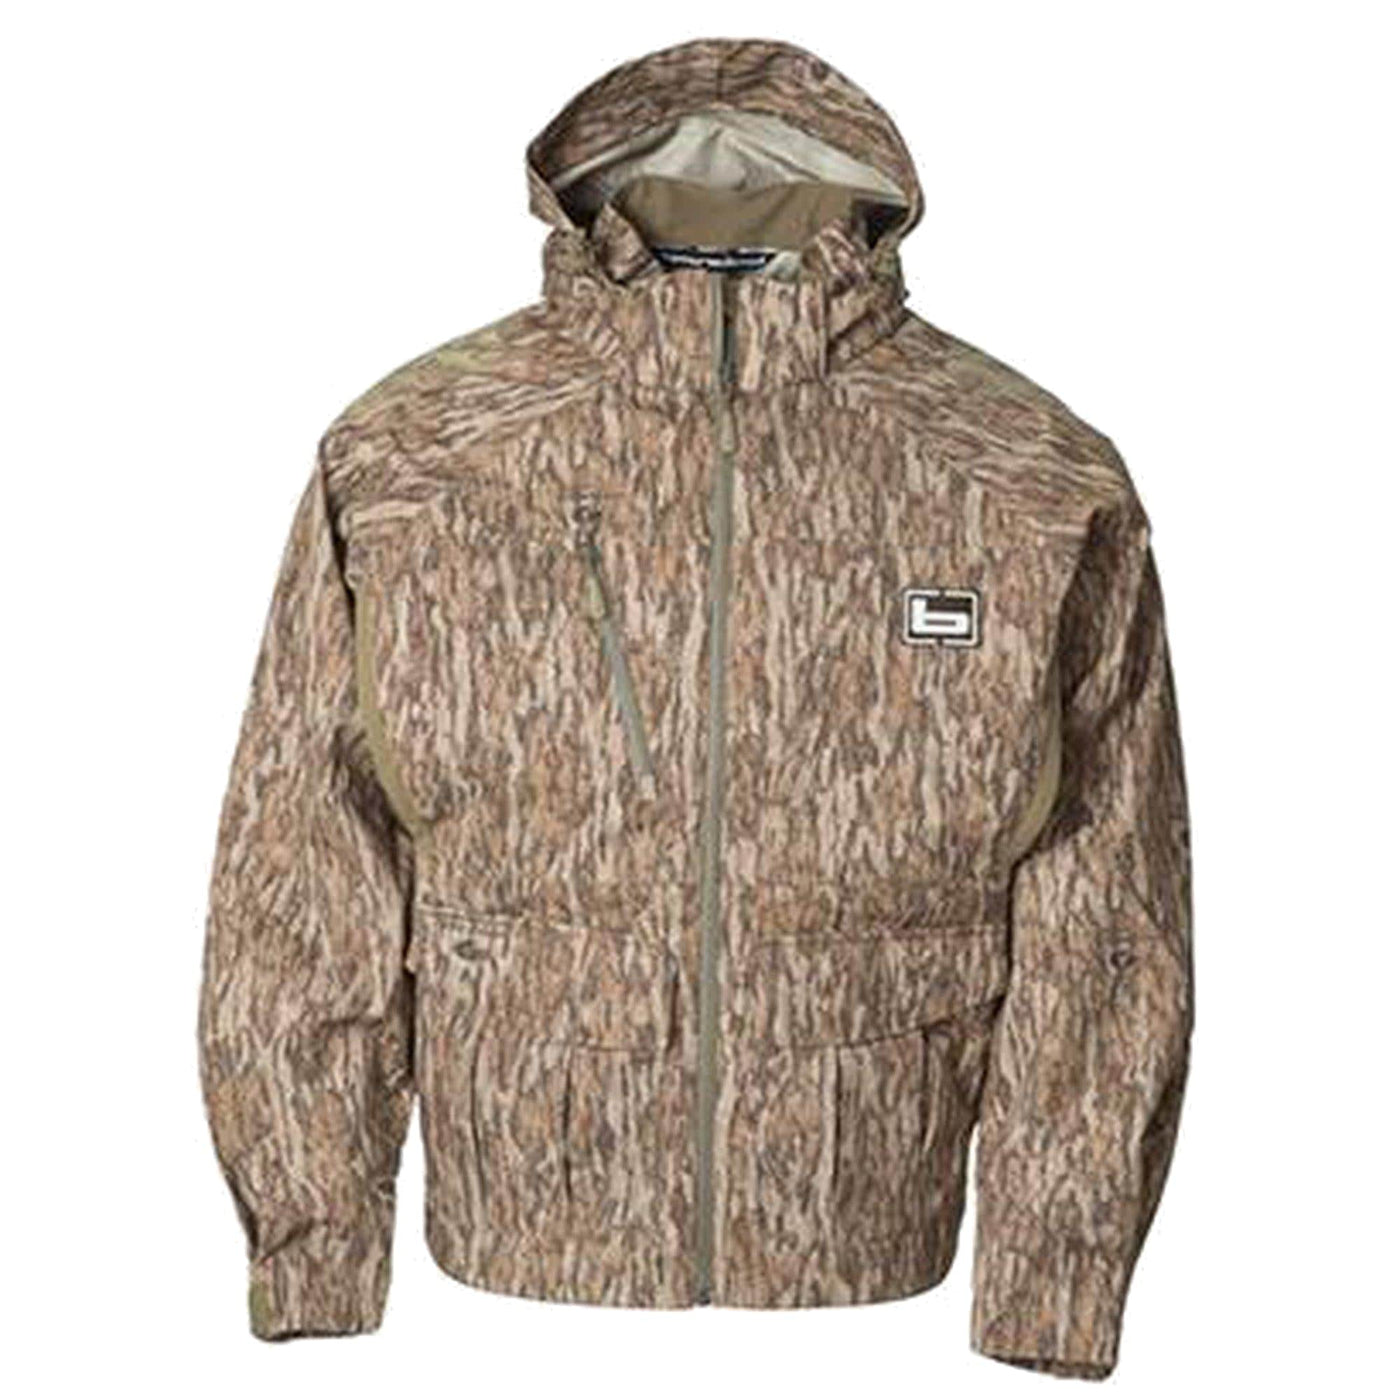 Calefaction 3-N-1 Insulated Wader Jacket - Bottomland